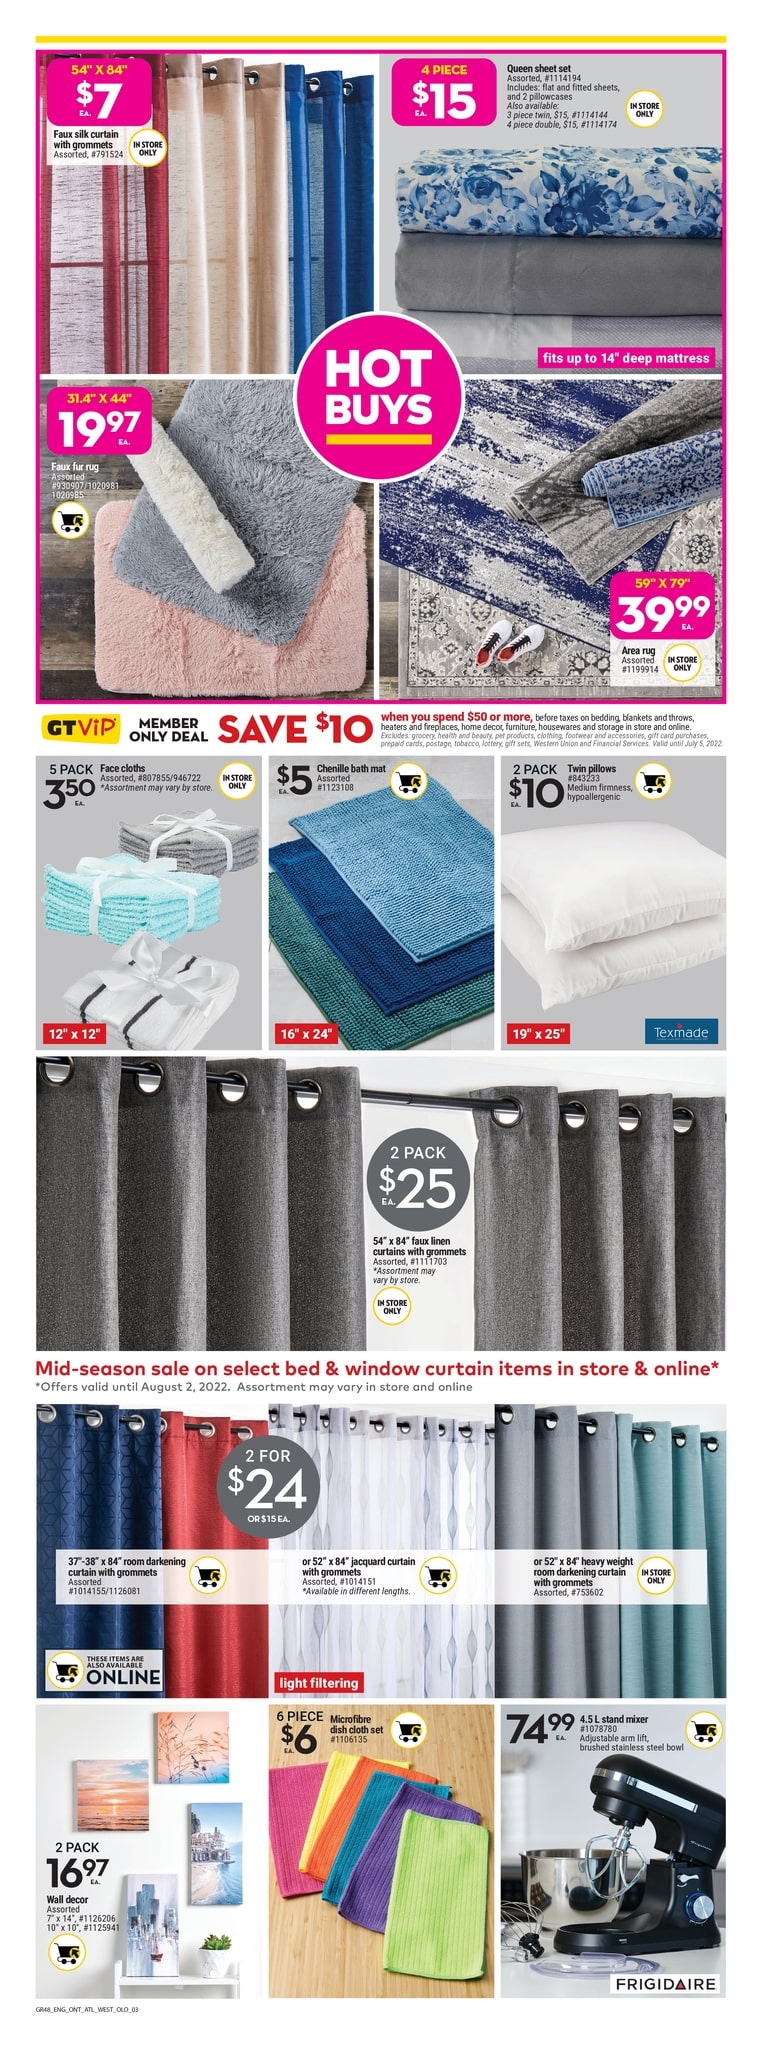 Giant Tiger - Weekly Flyer Specials - Page 9